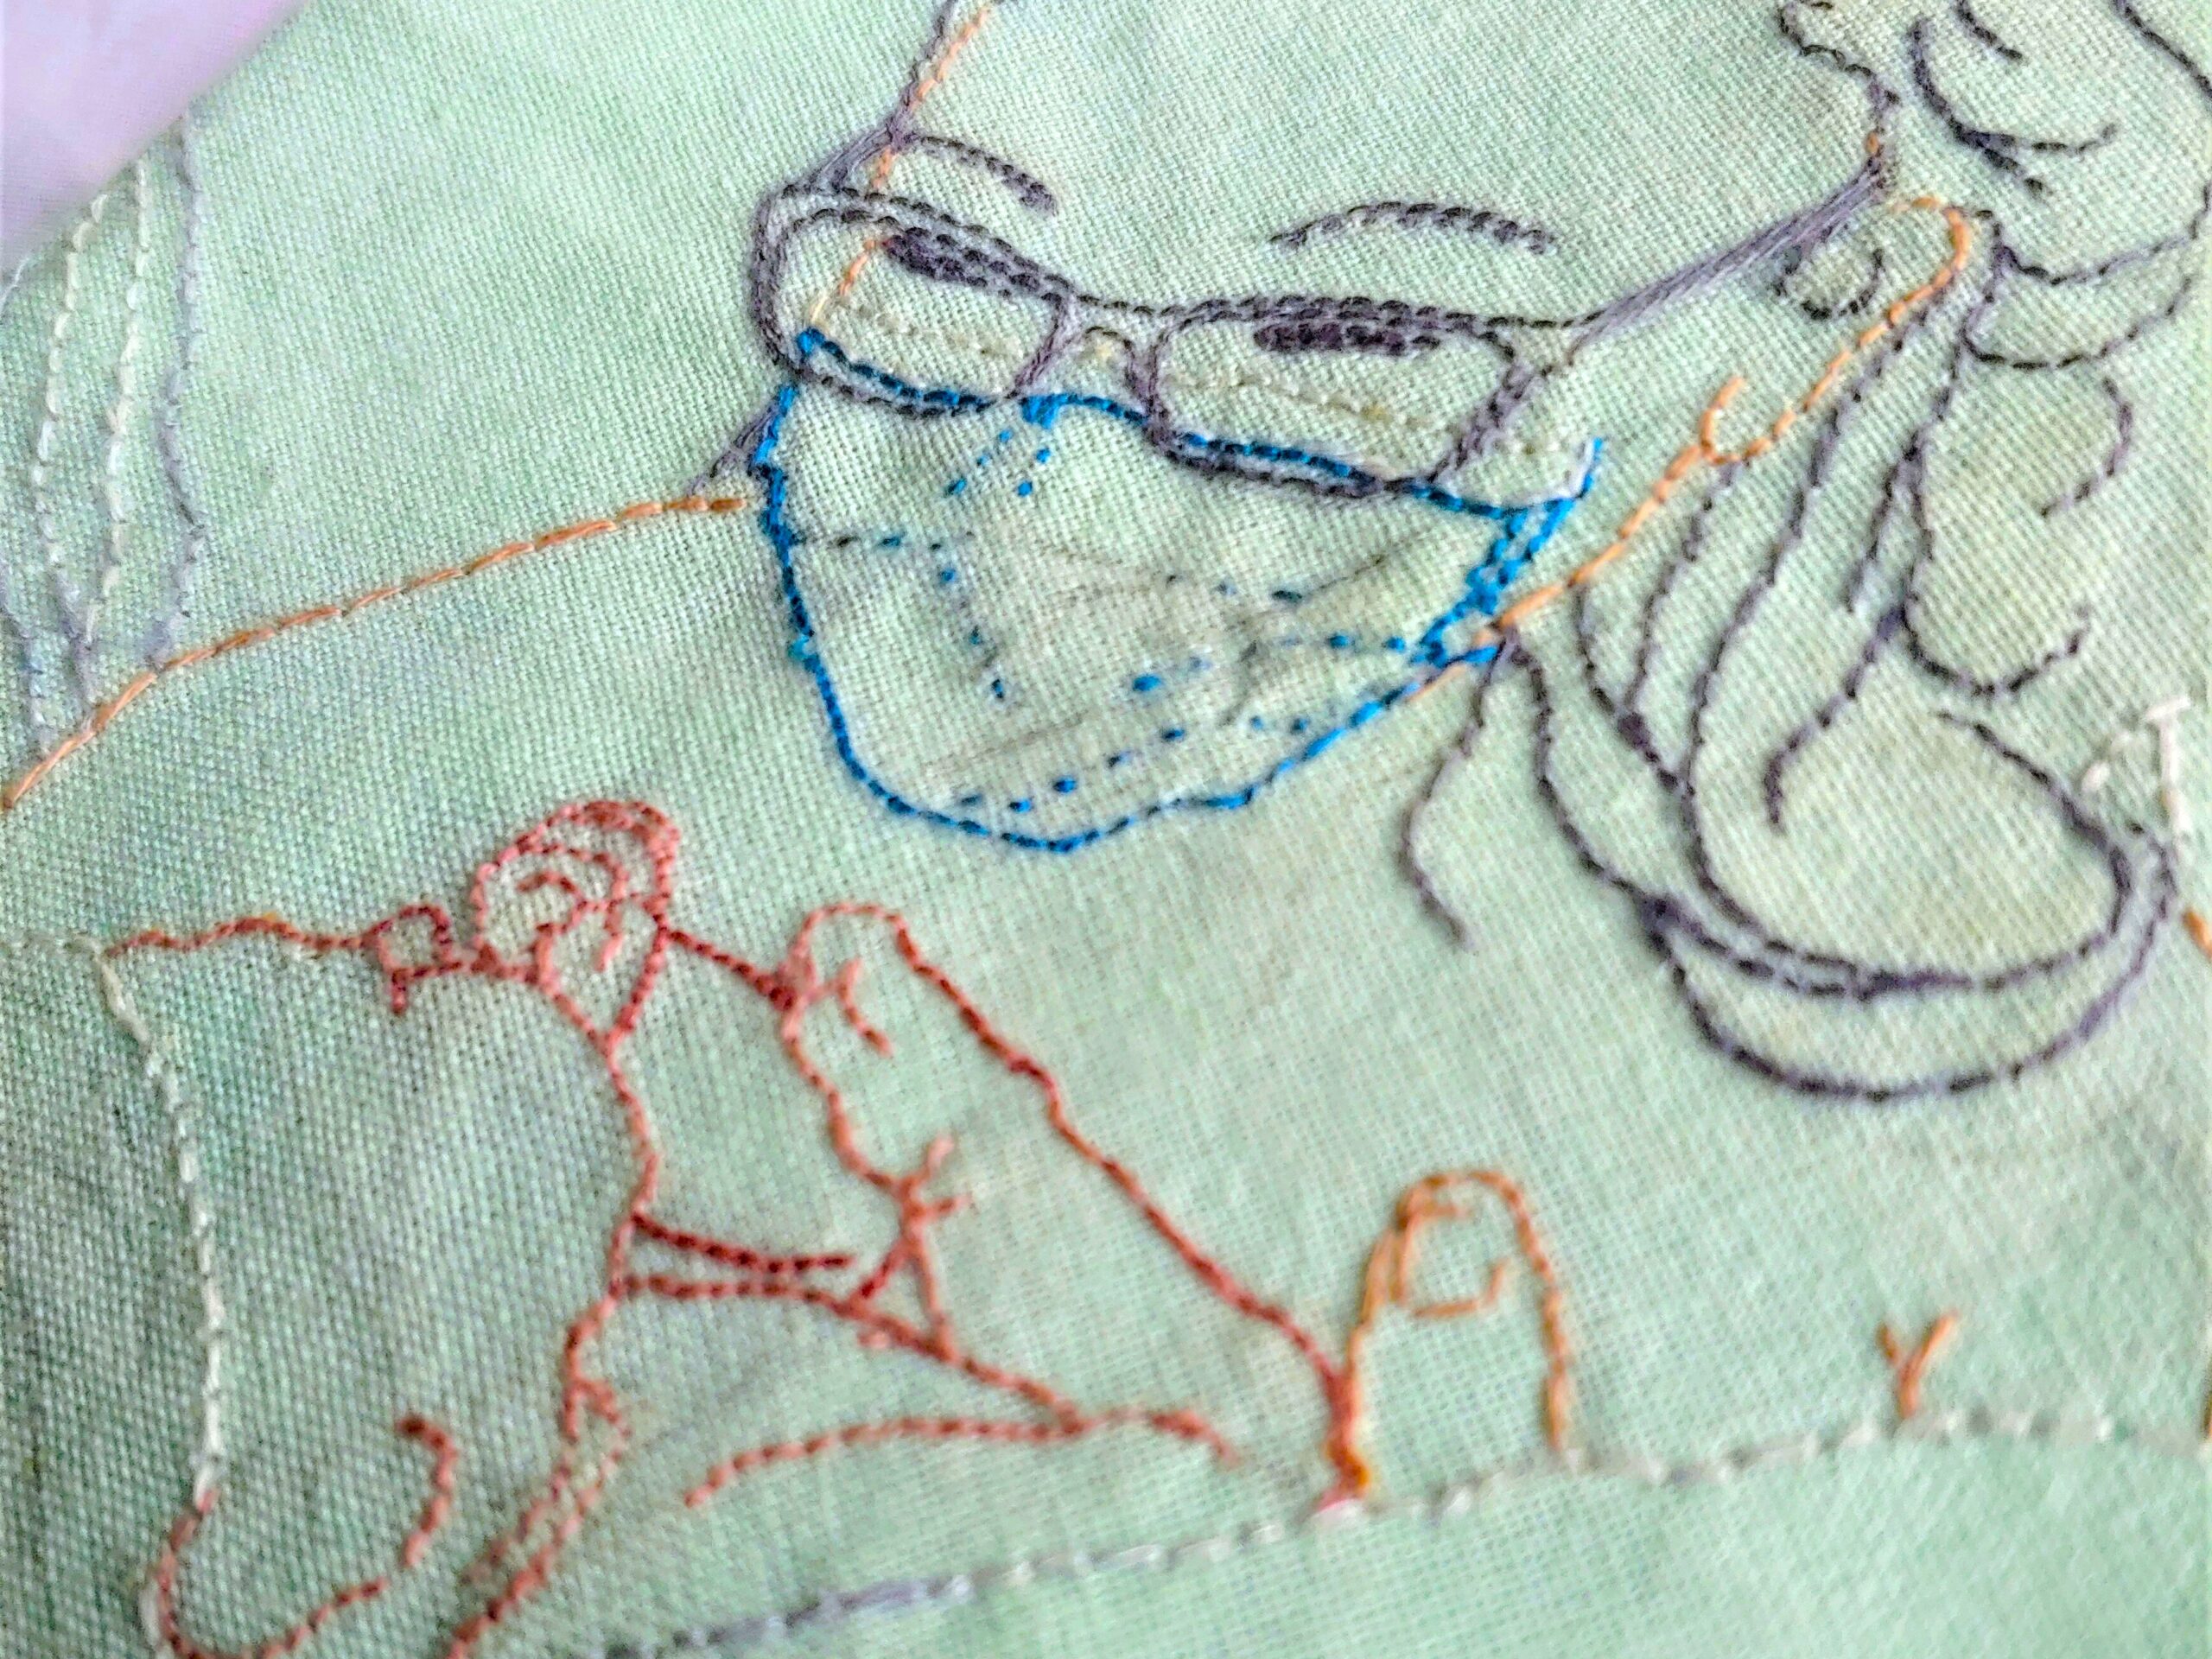 Lottie_Bolster_With Child masked_unmasked close up2